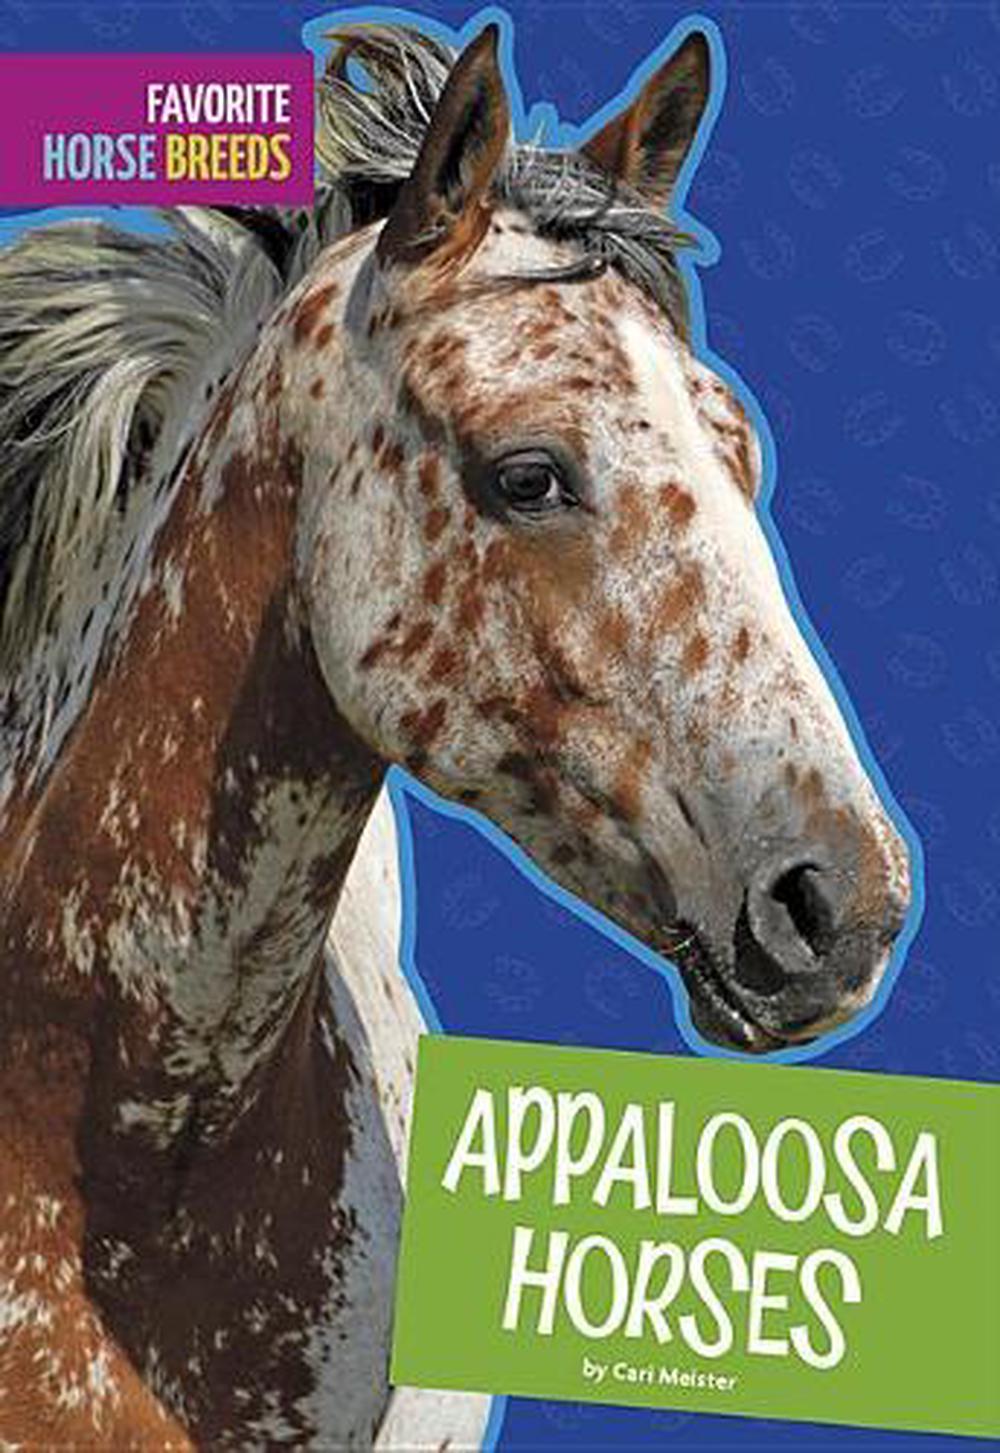 Appaloosa Horses by Carl Meister (English) Library Binding Book Free ...